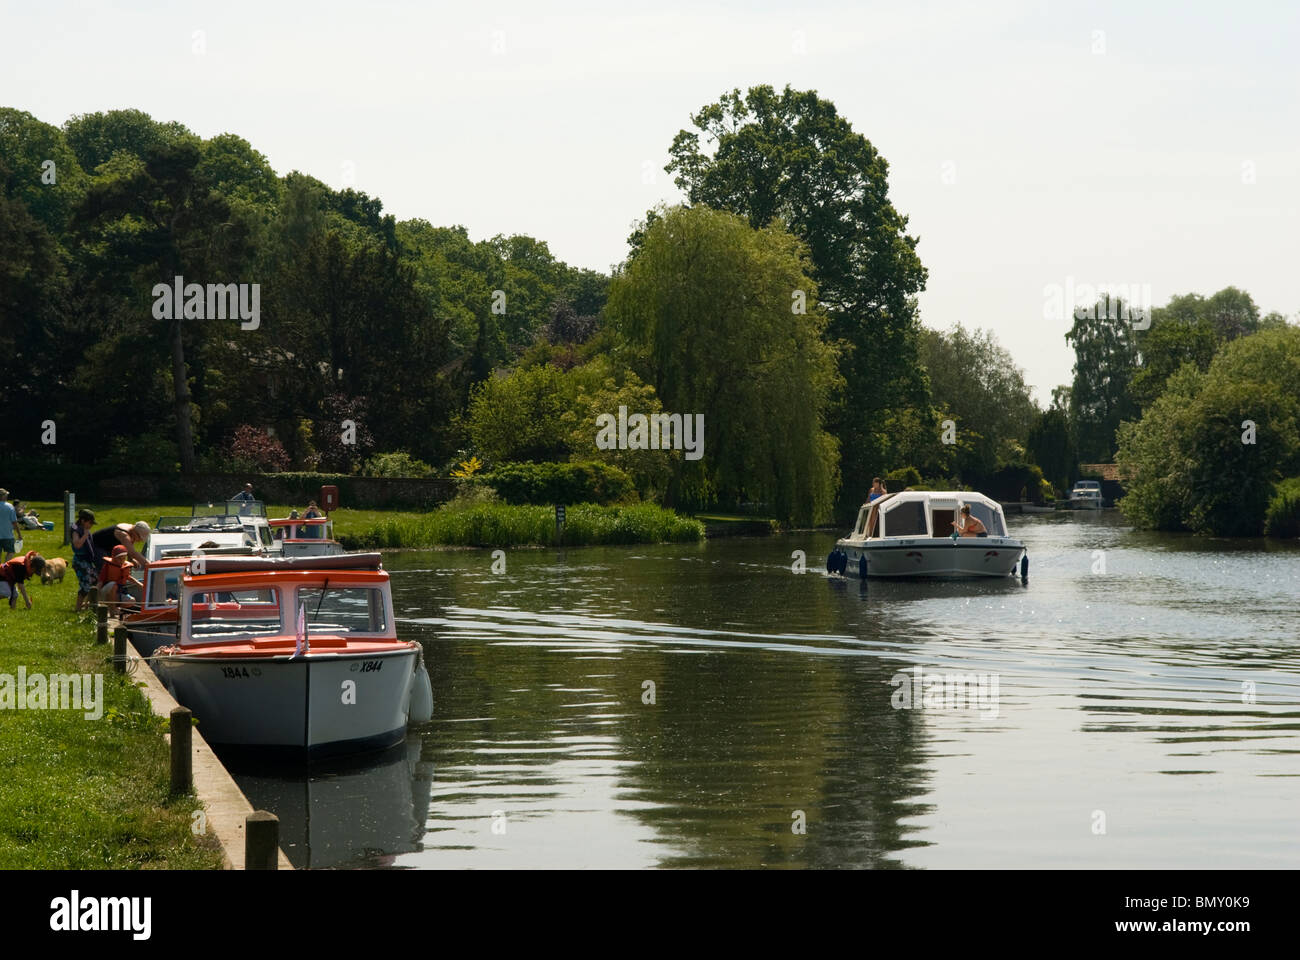 Boats on the River Bure at Coltishall, Norfolk Broads, England. Stock Photo